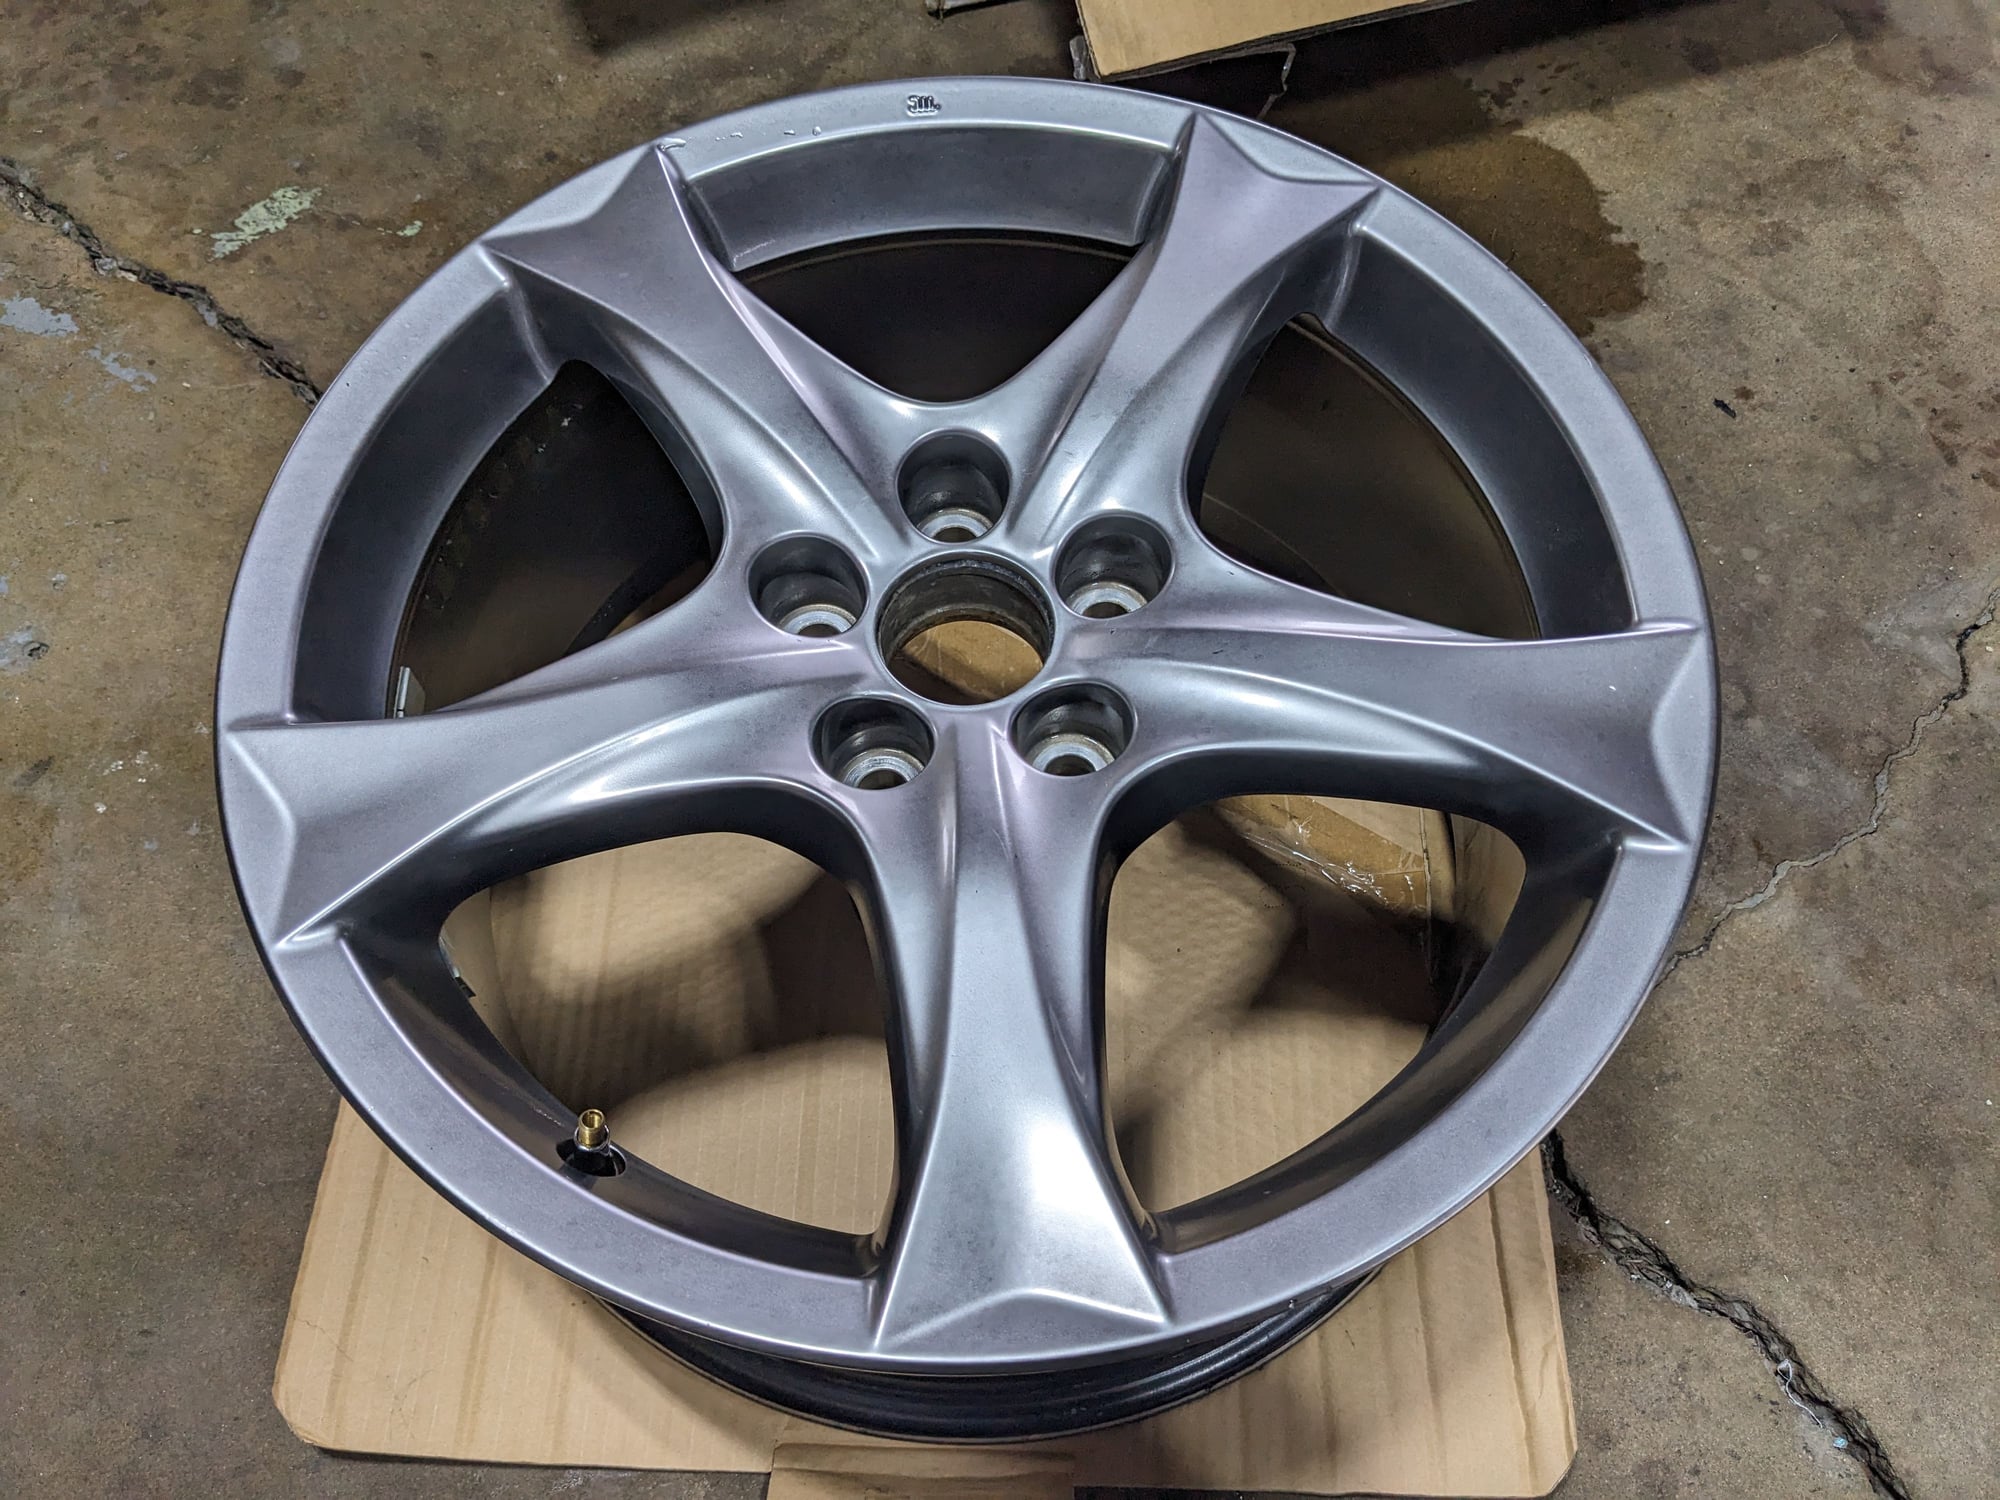 Wheels and Tires/Axles - 2008 is350 x-package rear wheel enkei 18" - Used - 2005 to 2008 Lexus IS350 - Chicago, IL 60630, United States